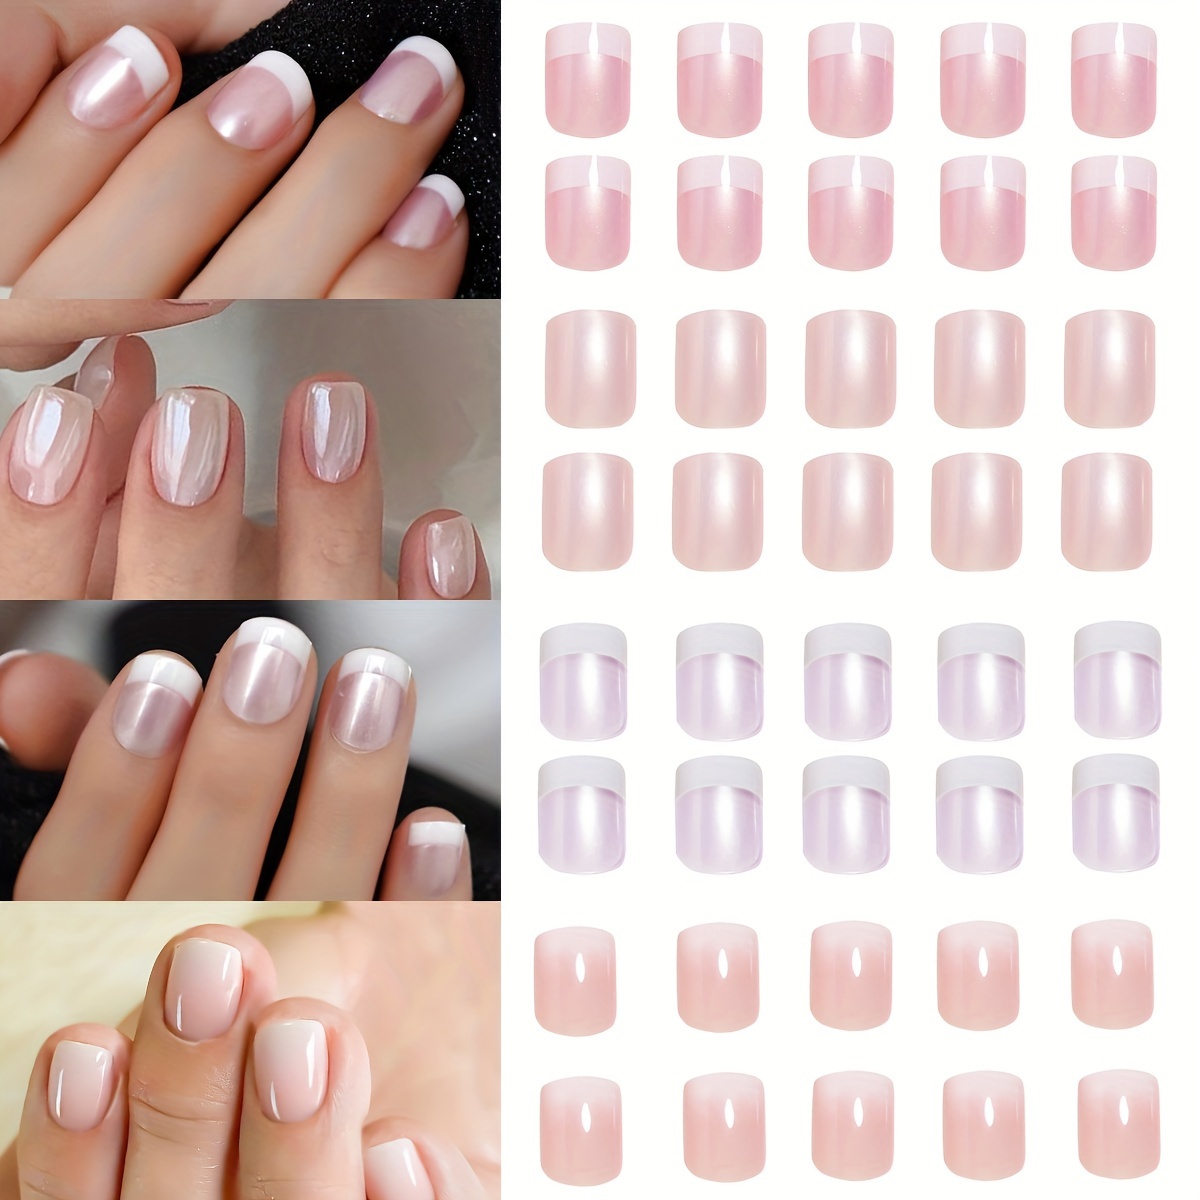 

4 Packs (96 Pcs) Glossy Short Square Press On Nails Pink And Purple Fake Nails With French Tips Sweet False Nails For Women Girls Daily Wear